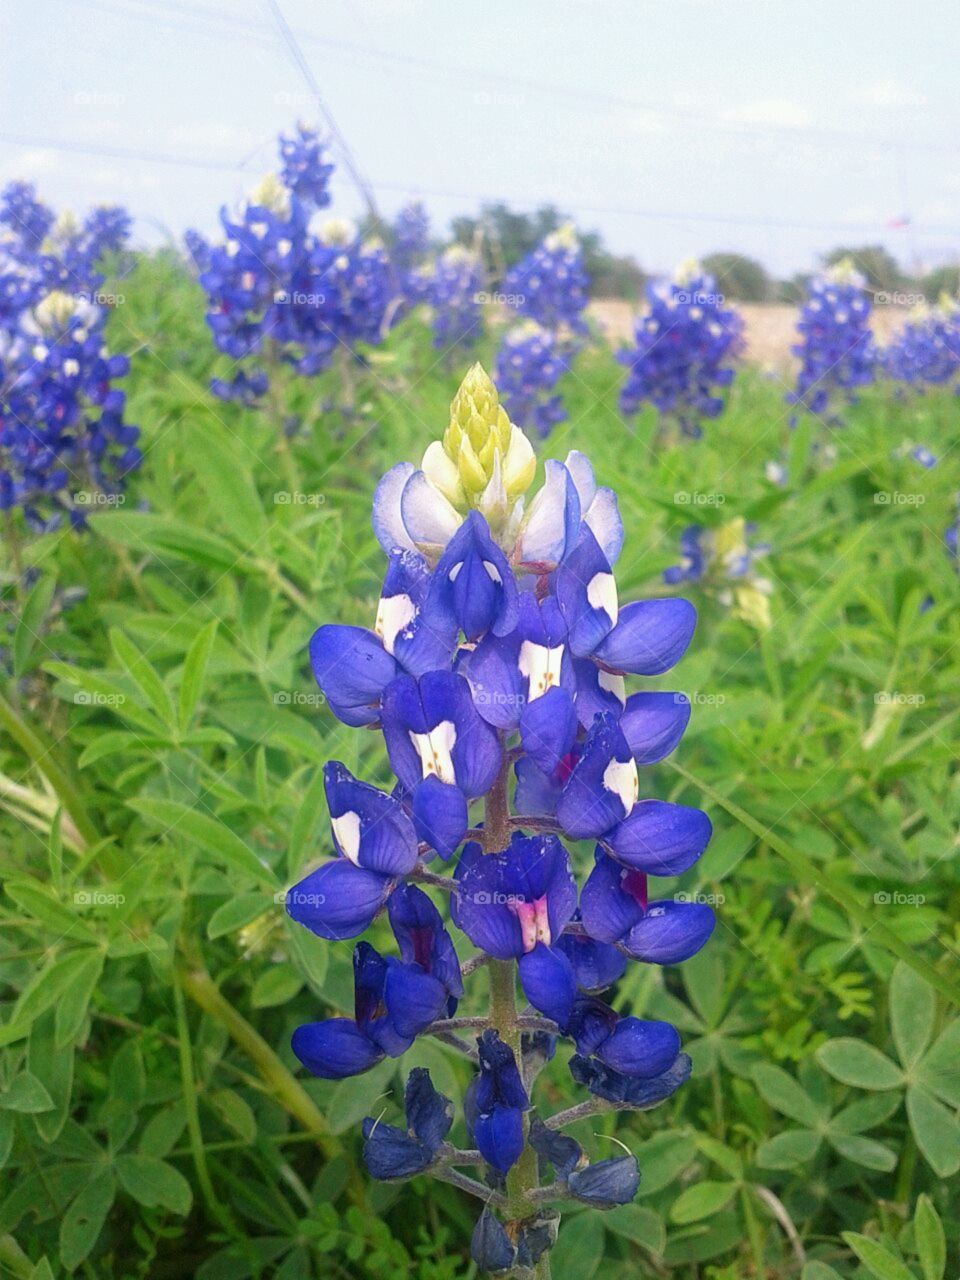 Bluebells. The State flower of Texas all in bloom